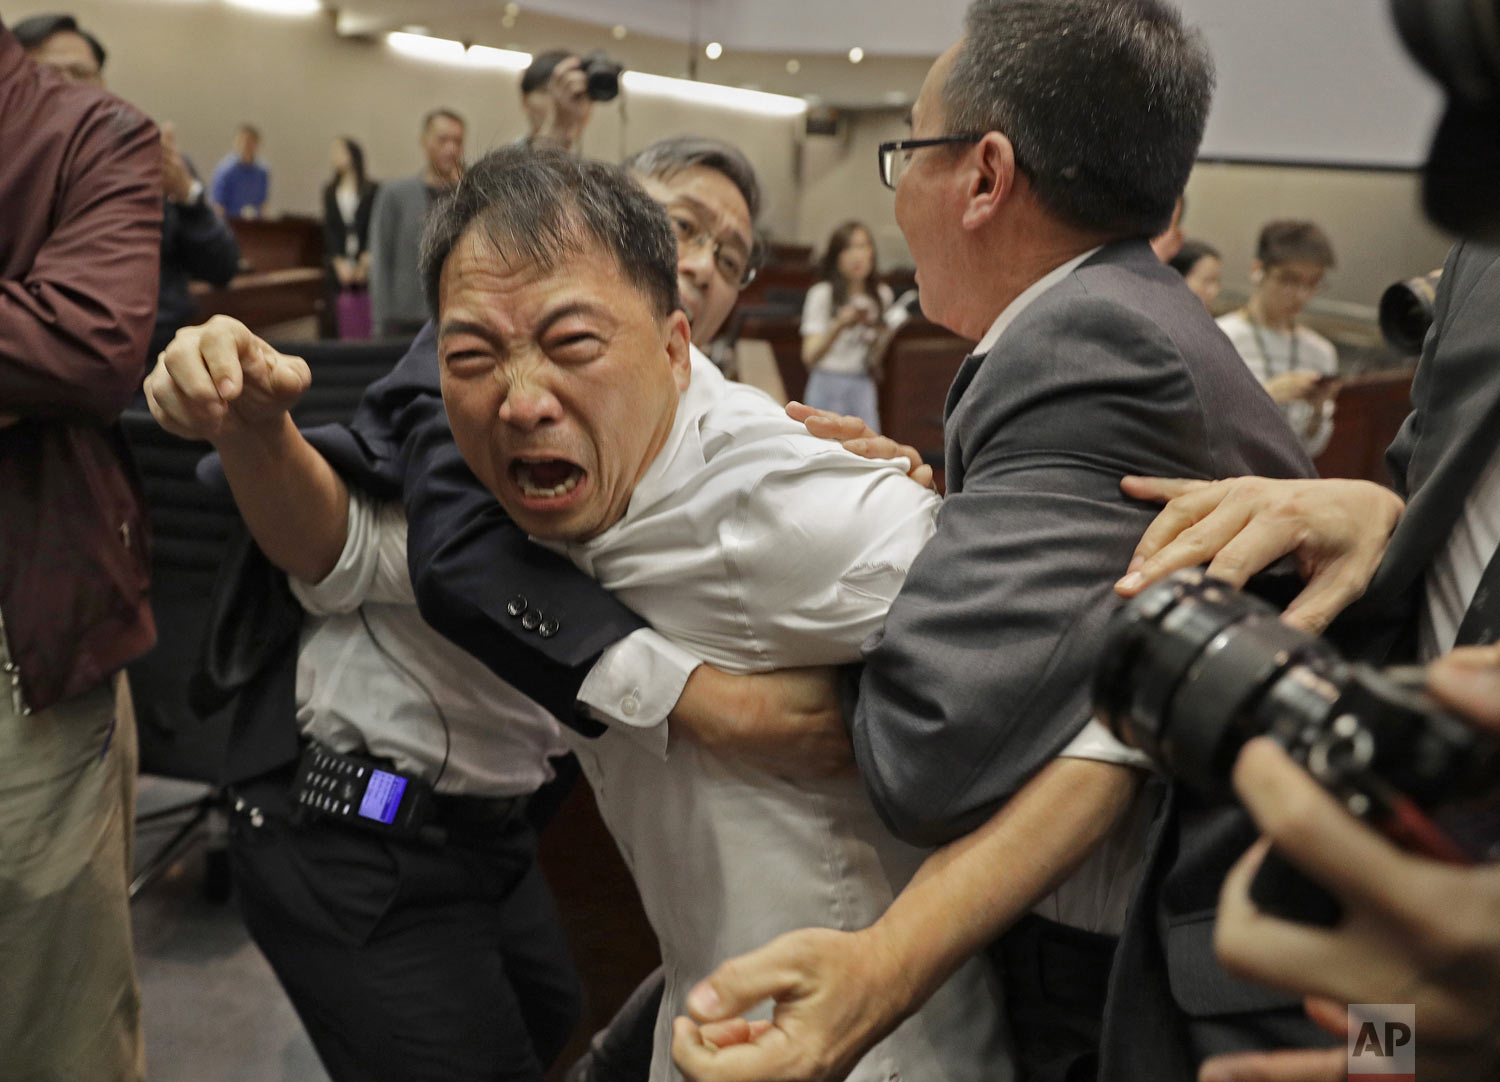  Pro-democracy lawmaker Wu Chi-wai, center, is restrained by security guards at the Legislative Council in Hong Kong, Saturday, May 11, 2019. Hong Kong's legislative assembly descended into chaos Saturday as lawmakers for and against controversial am